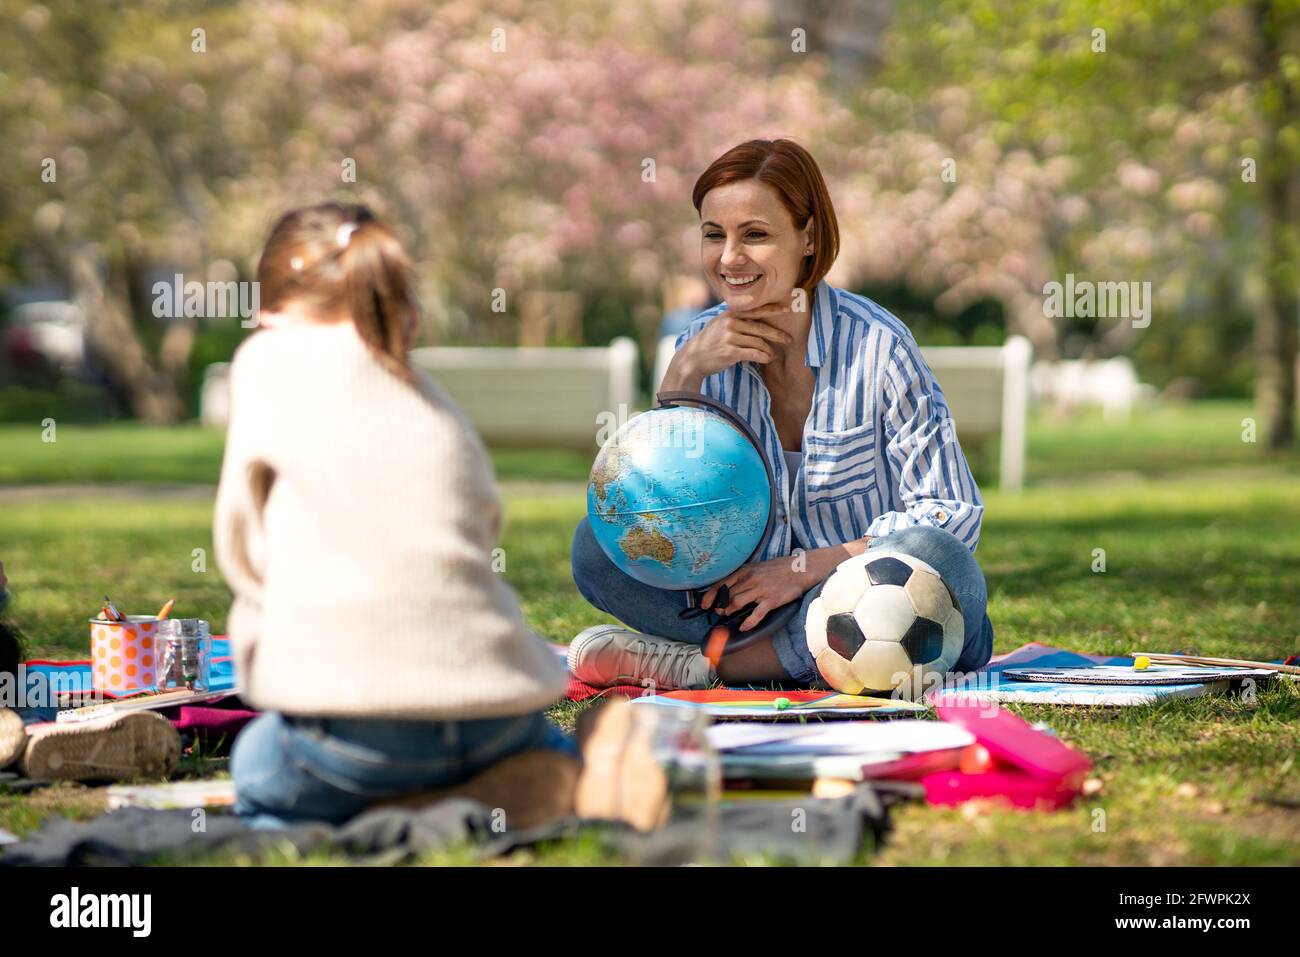 Teacher with small children sitting outdoors in city park, learning group education concept. Stock Photo